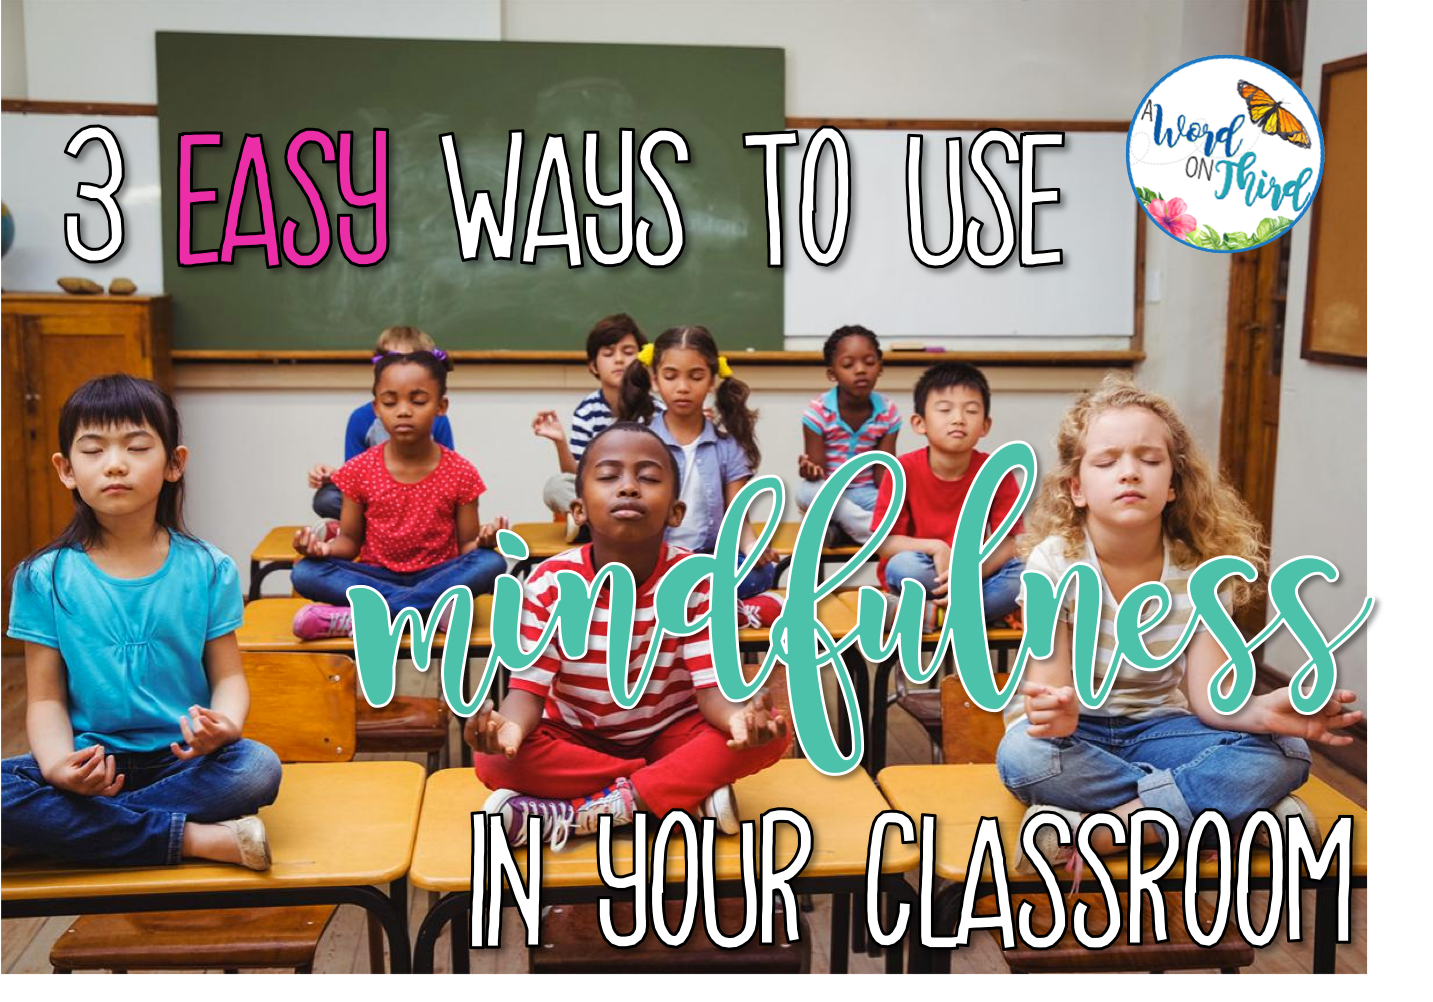 3-easy-ways-to-use-mindfulness-in-your-classroom-a-word-on-third